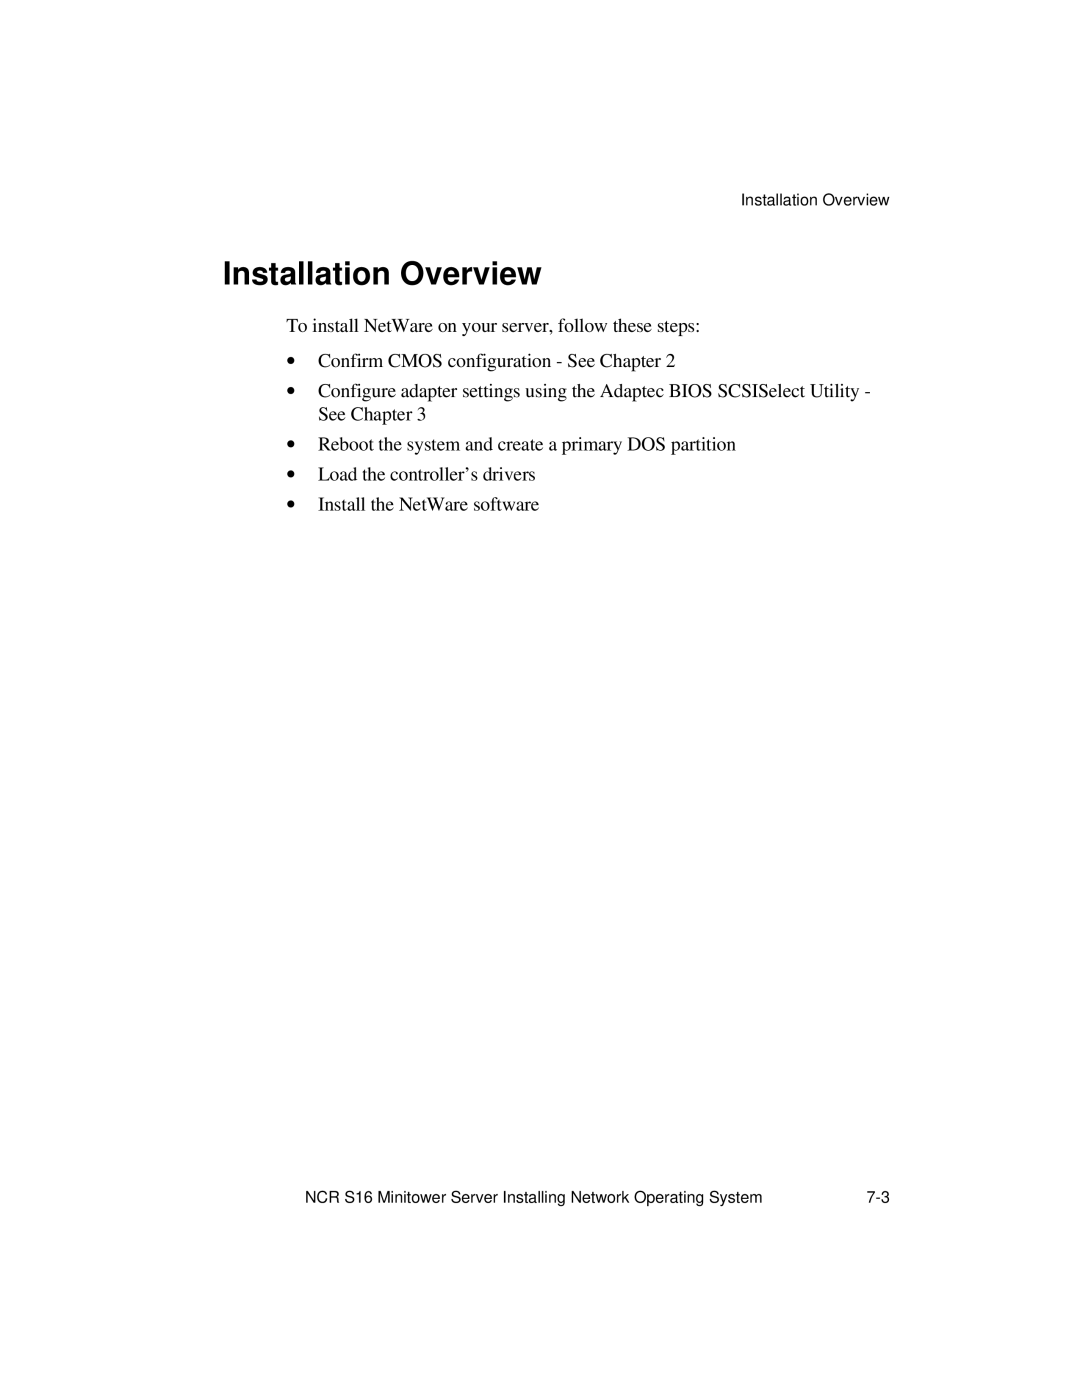 NCR S16 manual Installation Overview 